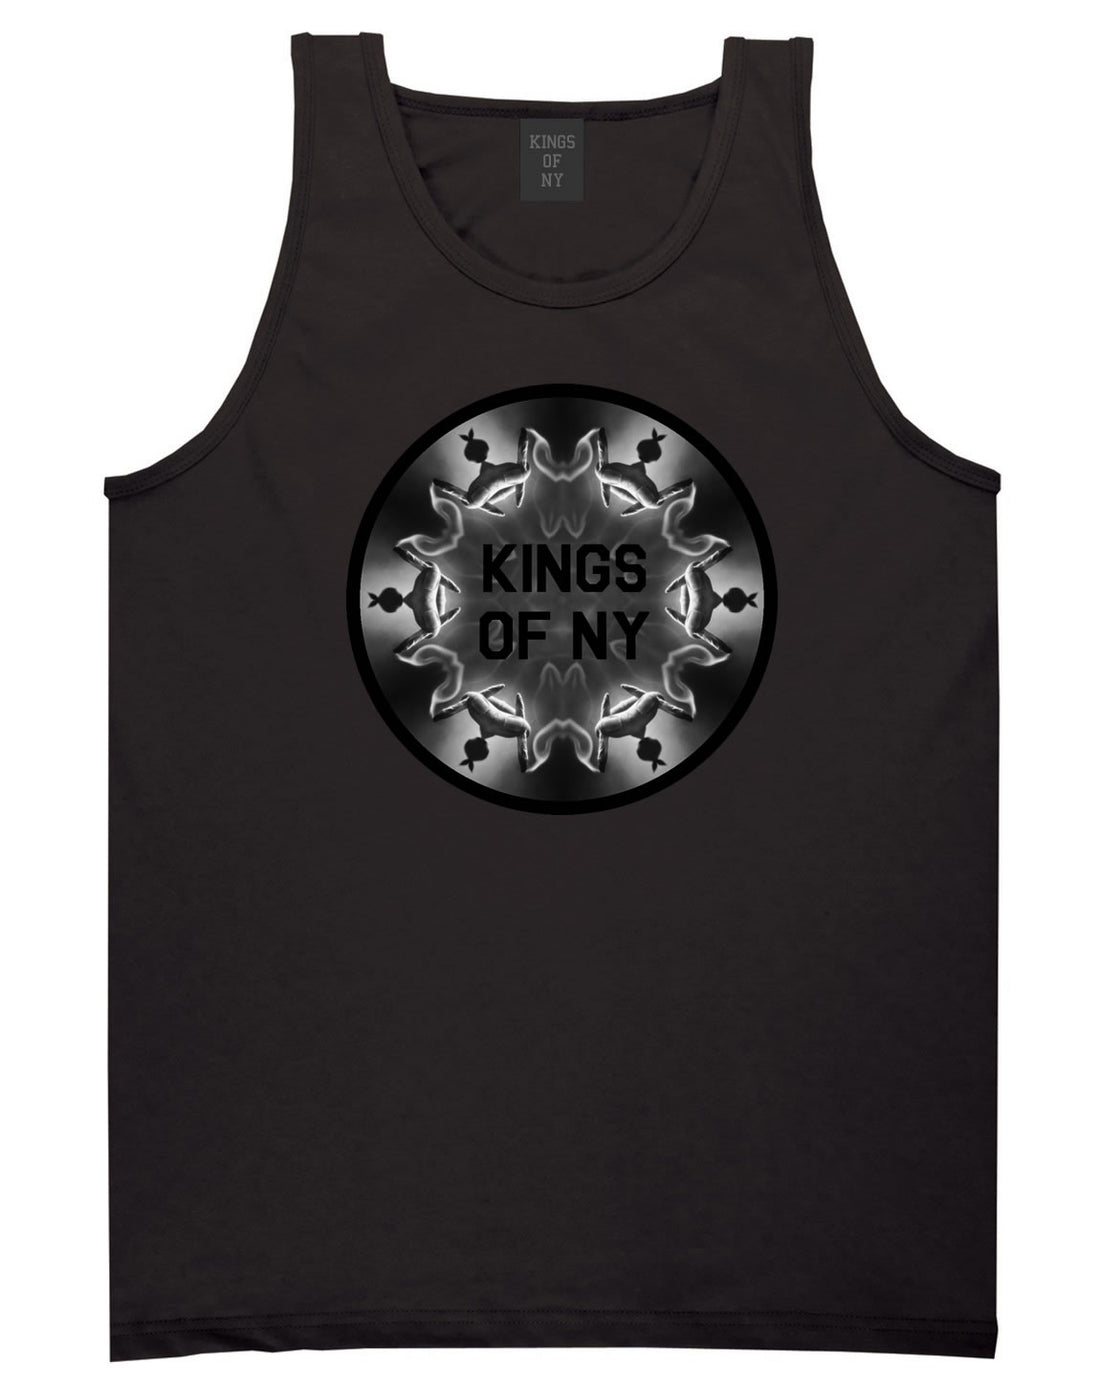 Pass That Blunt Tank Top in Black By Kings Of NY